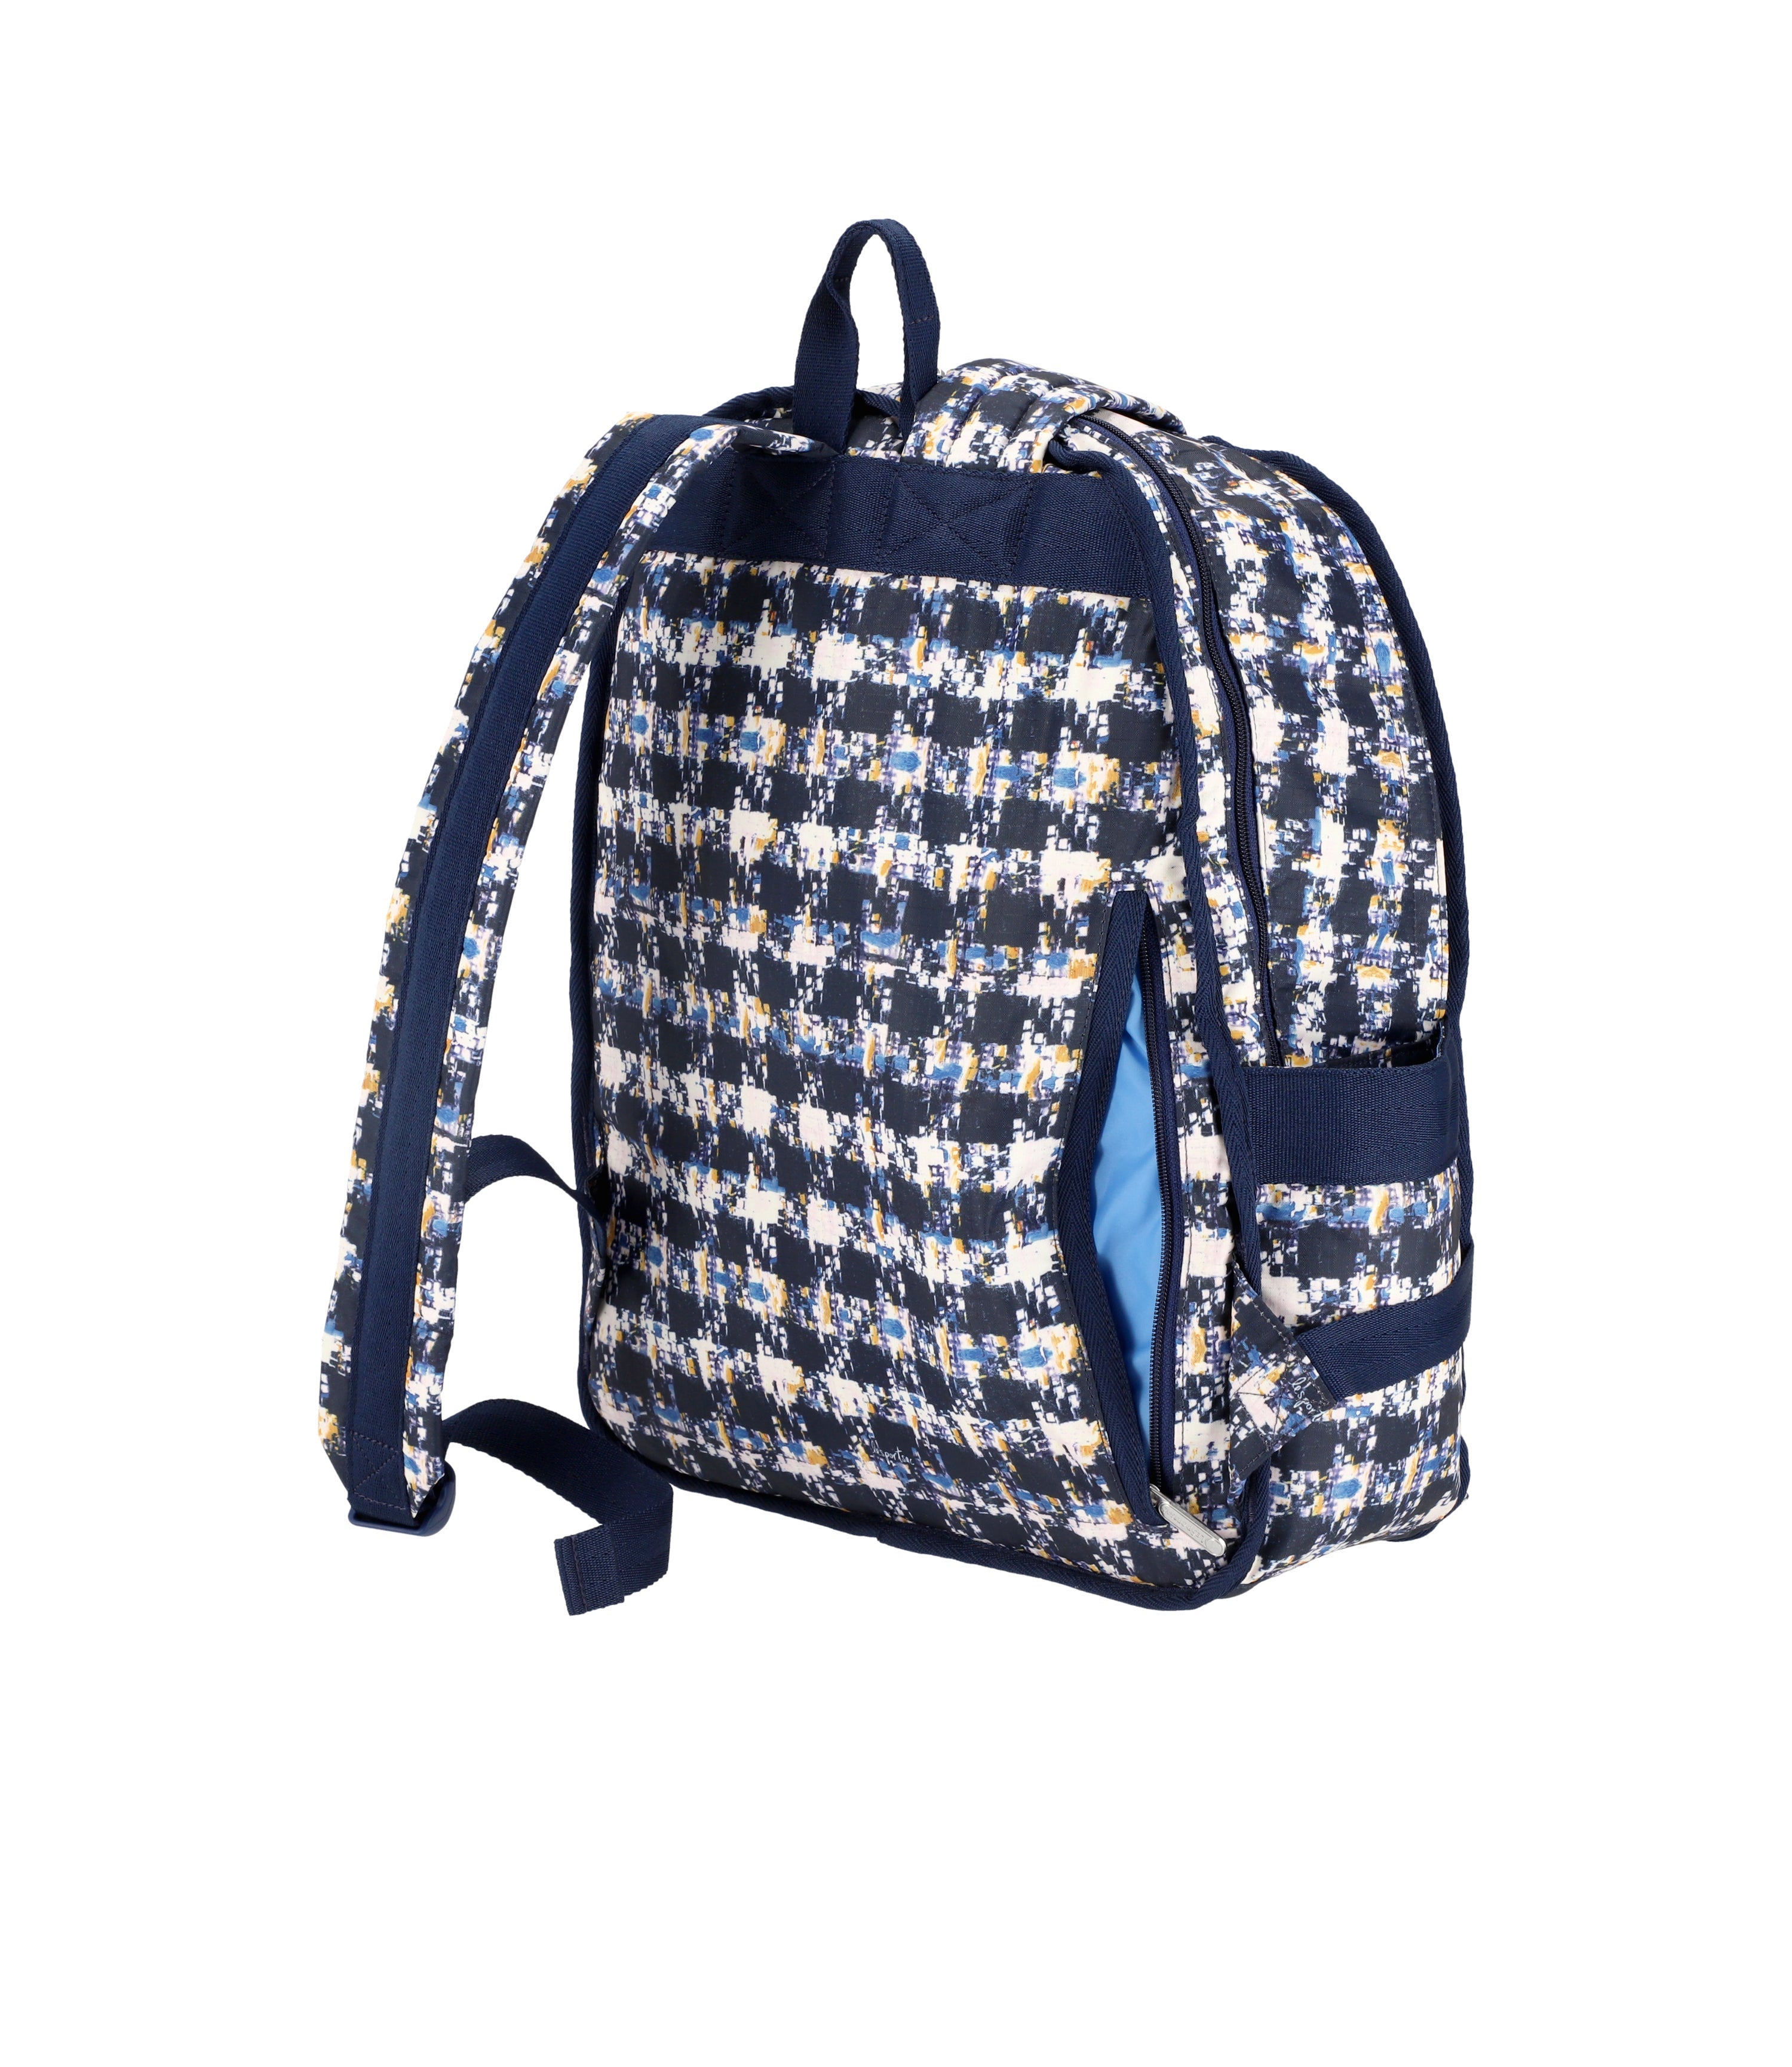 Route Backpack - Autumn Tweed print – LeSportsac